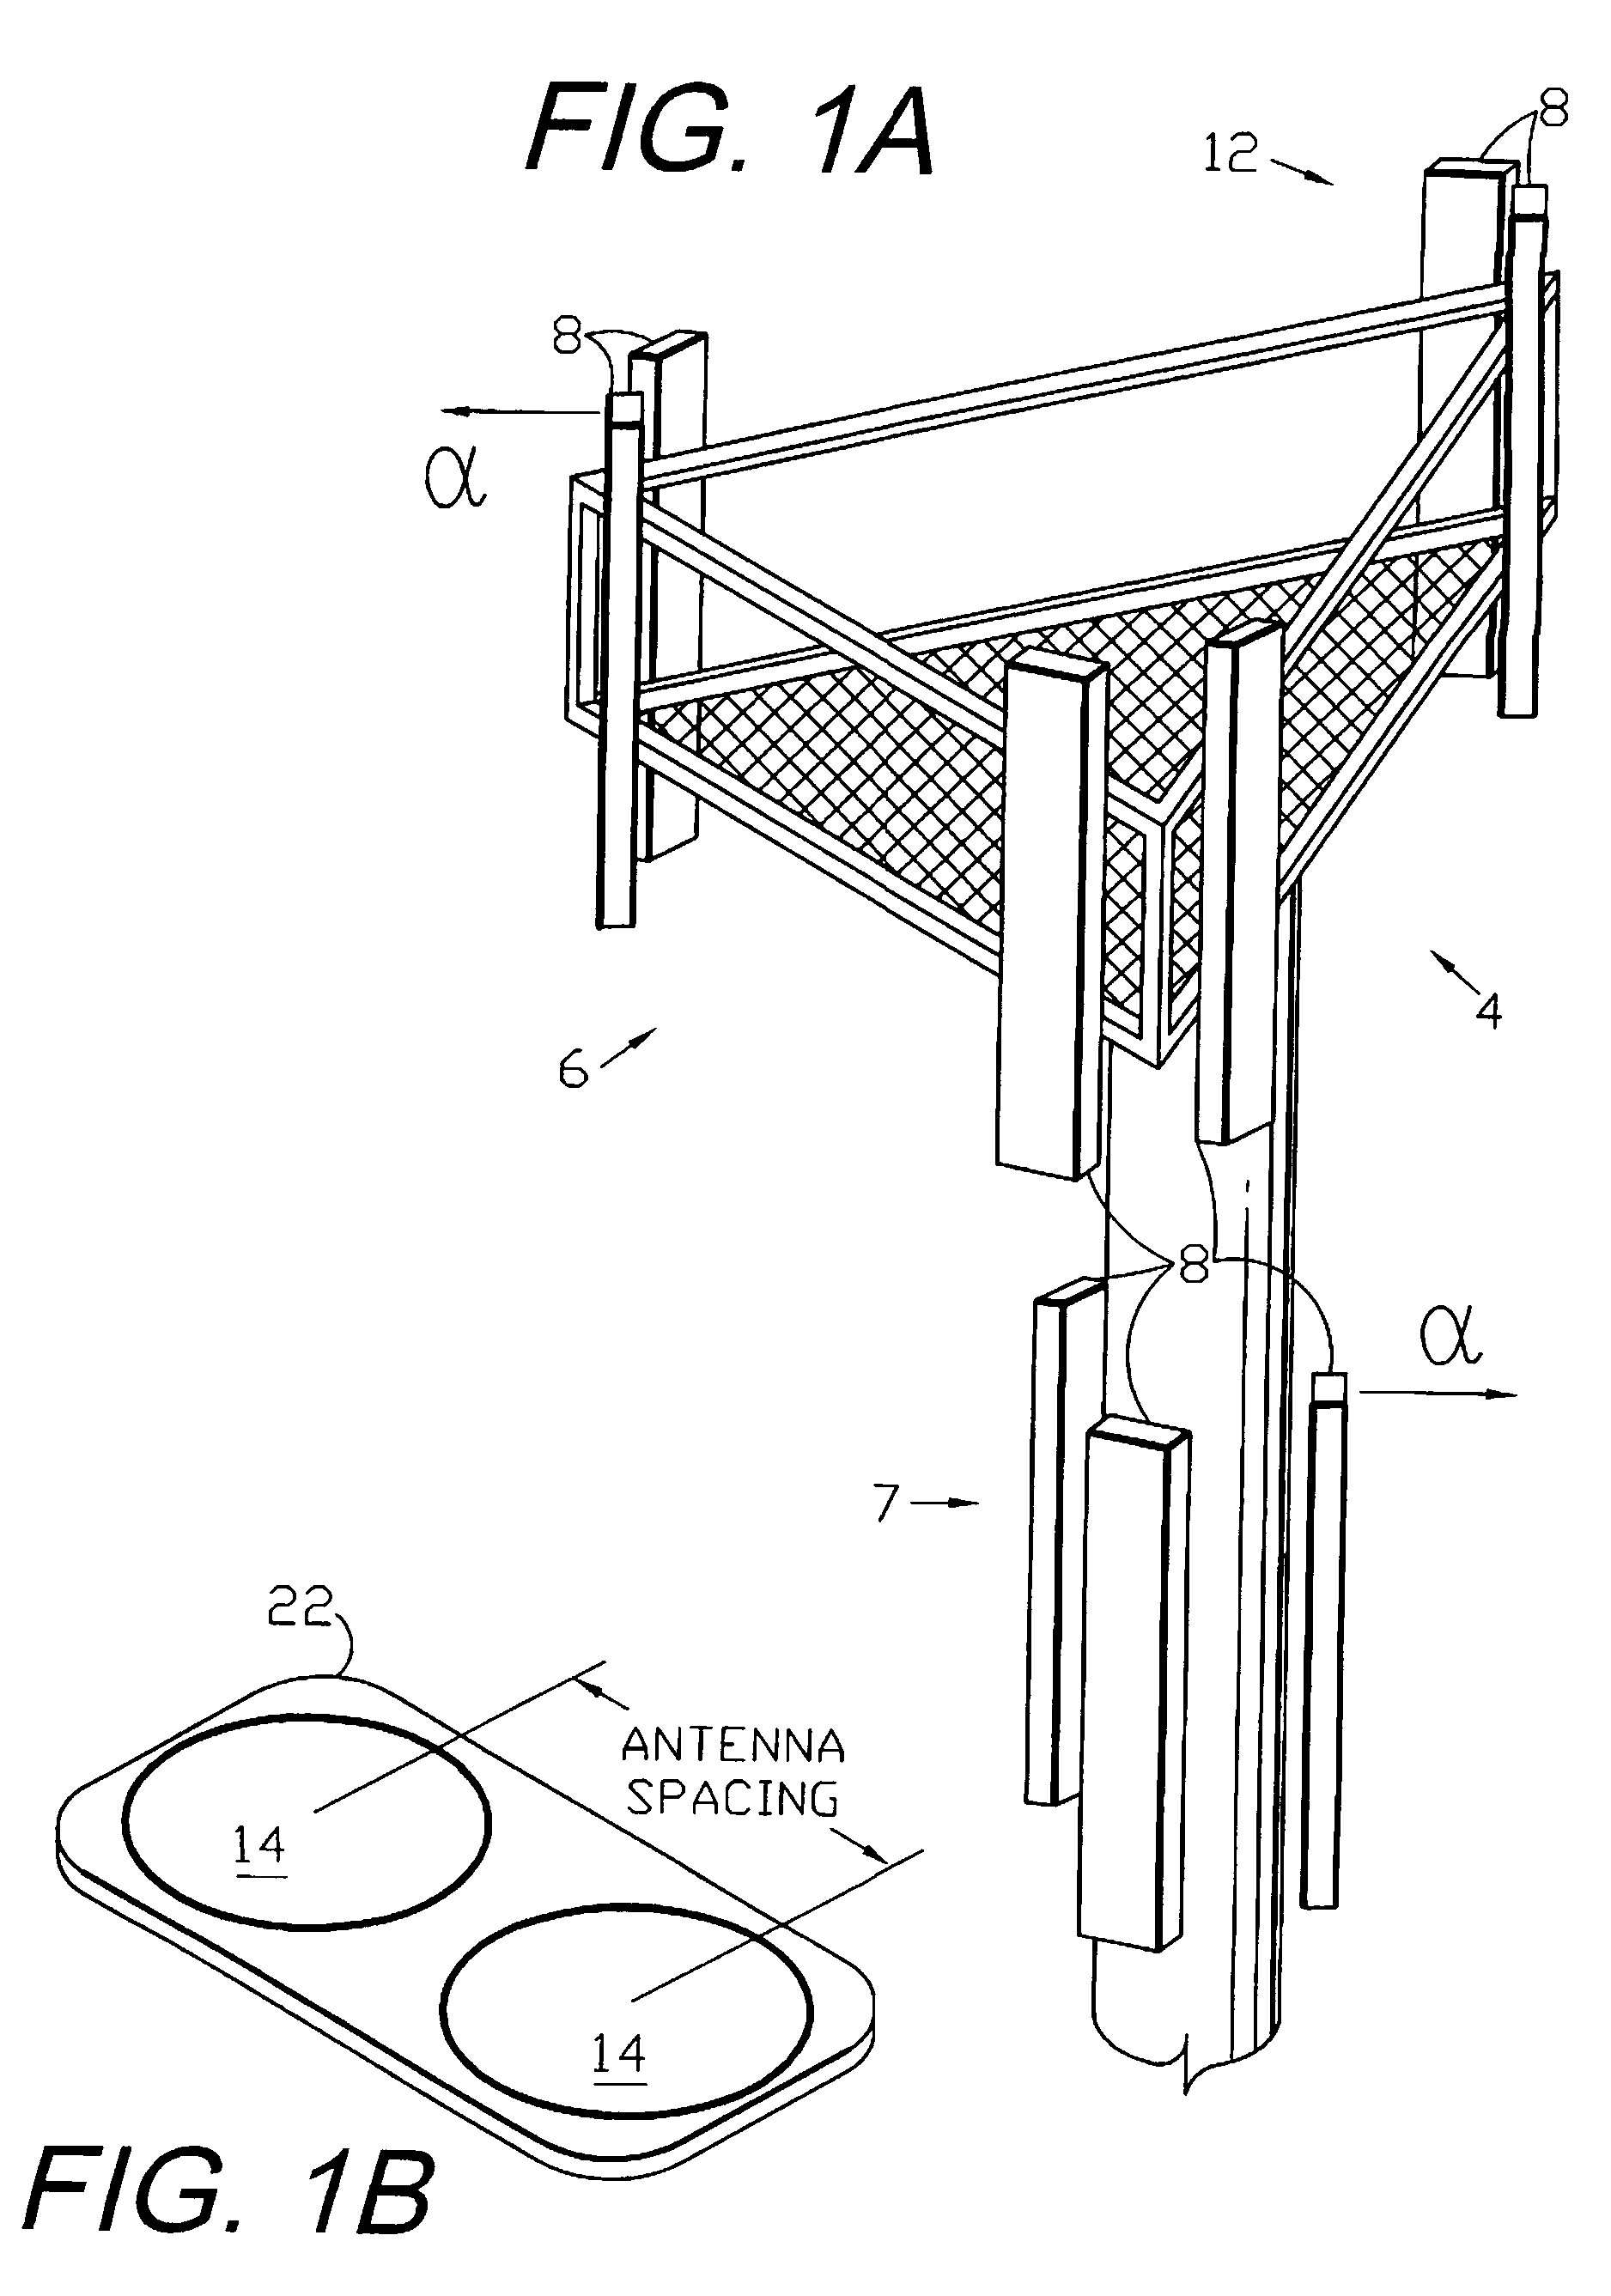 Antenna alignment and monitoring system and method using GNSS